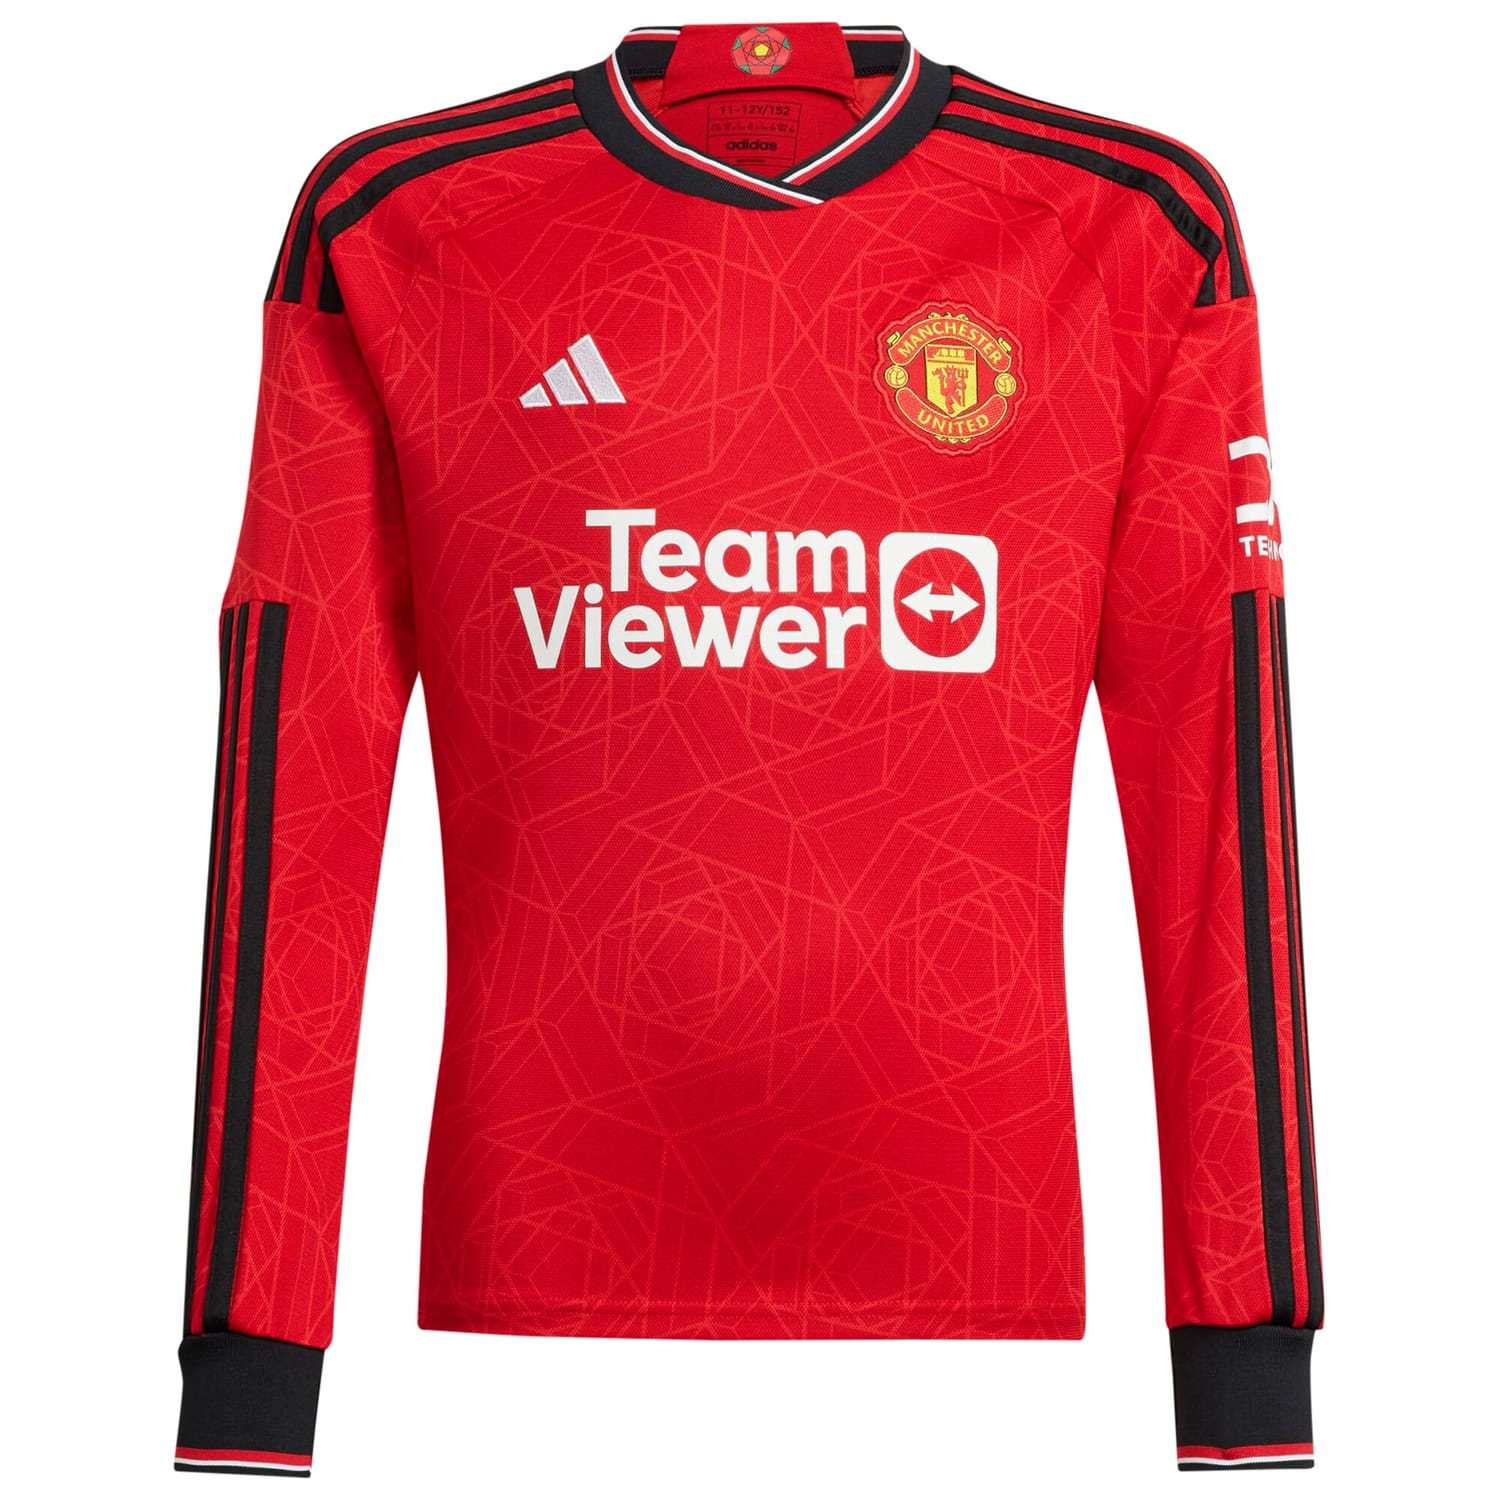 Premier League Manchester United Home Cup Jersey Shirt Long Sleeve 2023-24 player Melvine Malard printing for Men